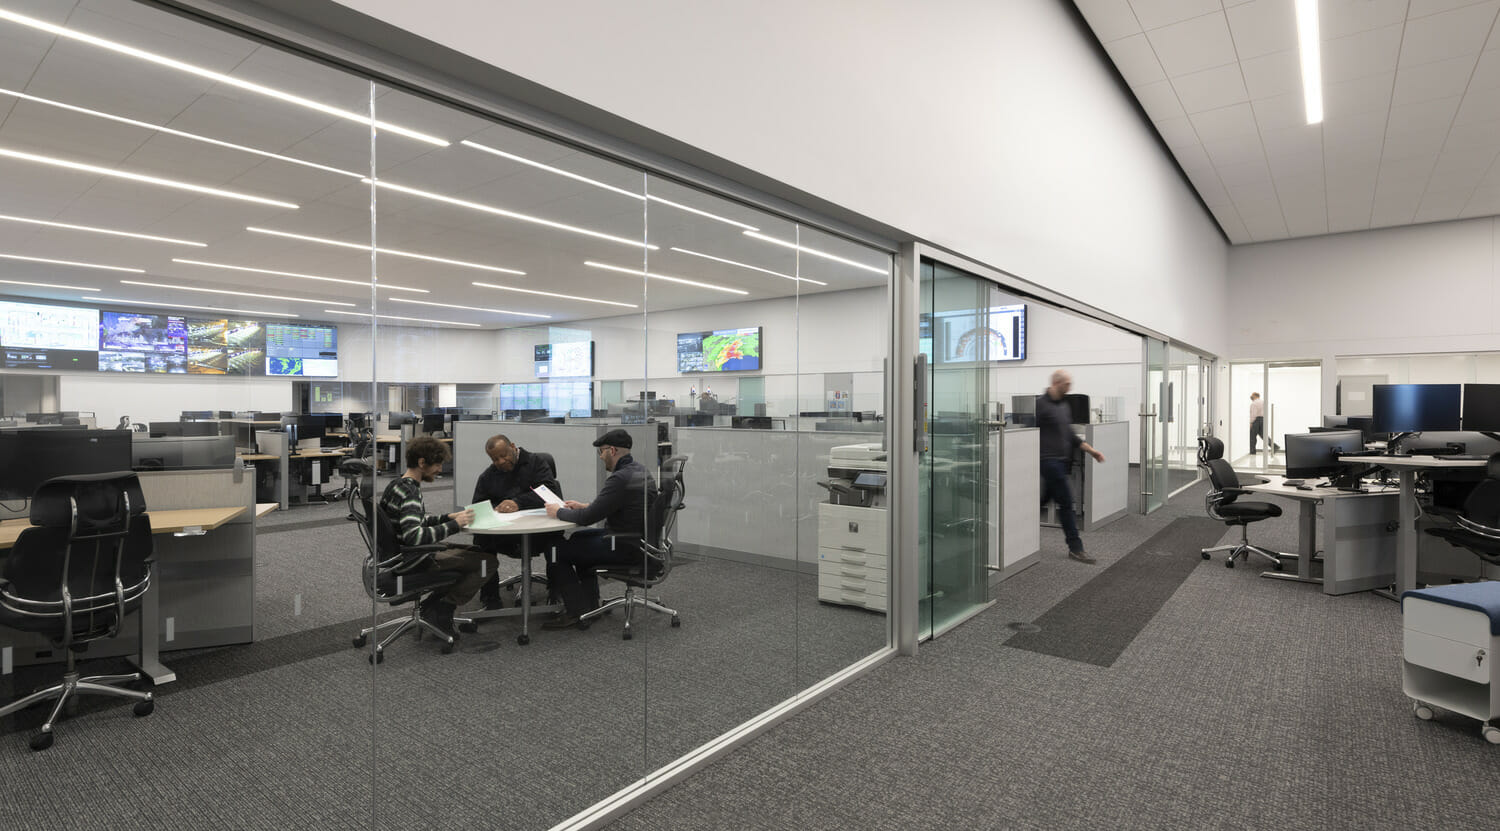 A glass office with people working at desks.